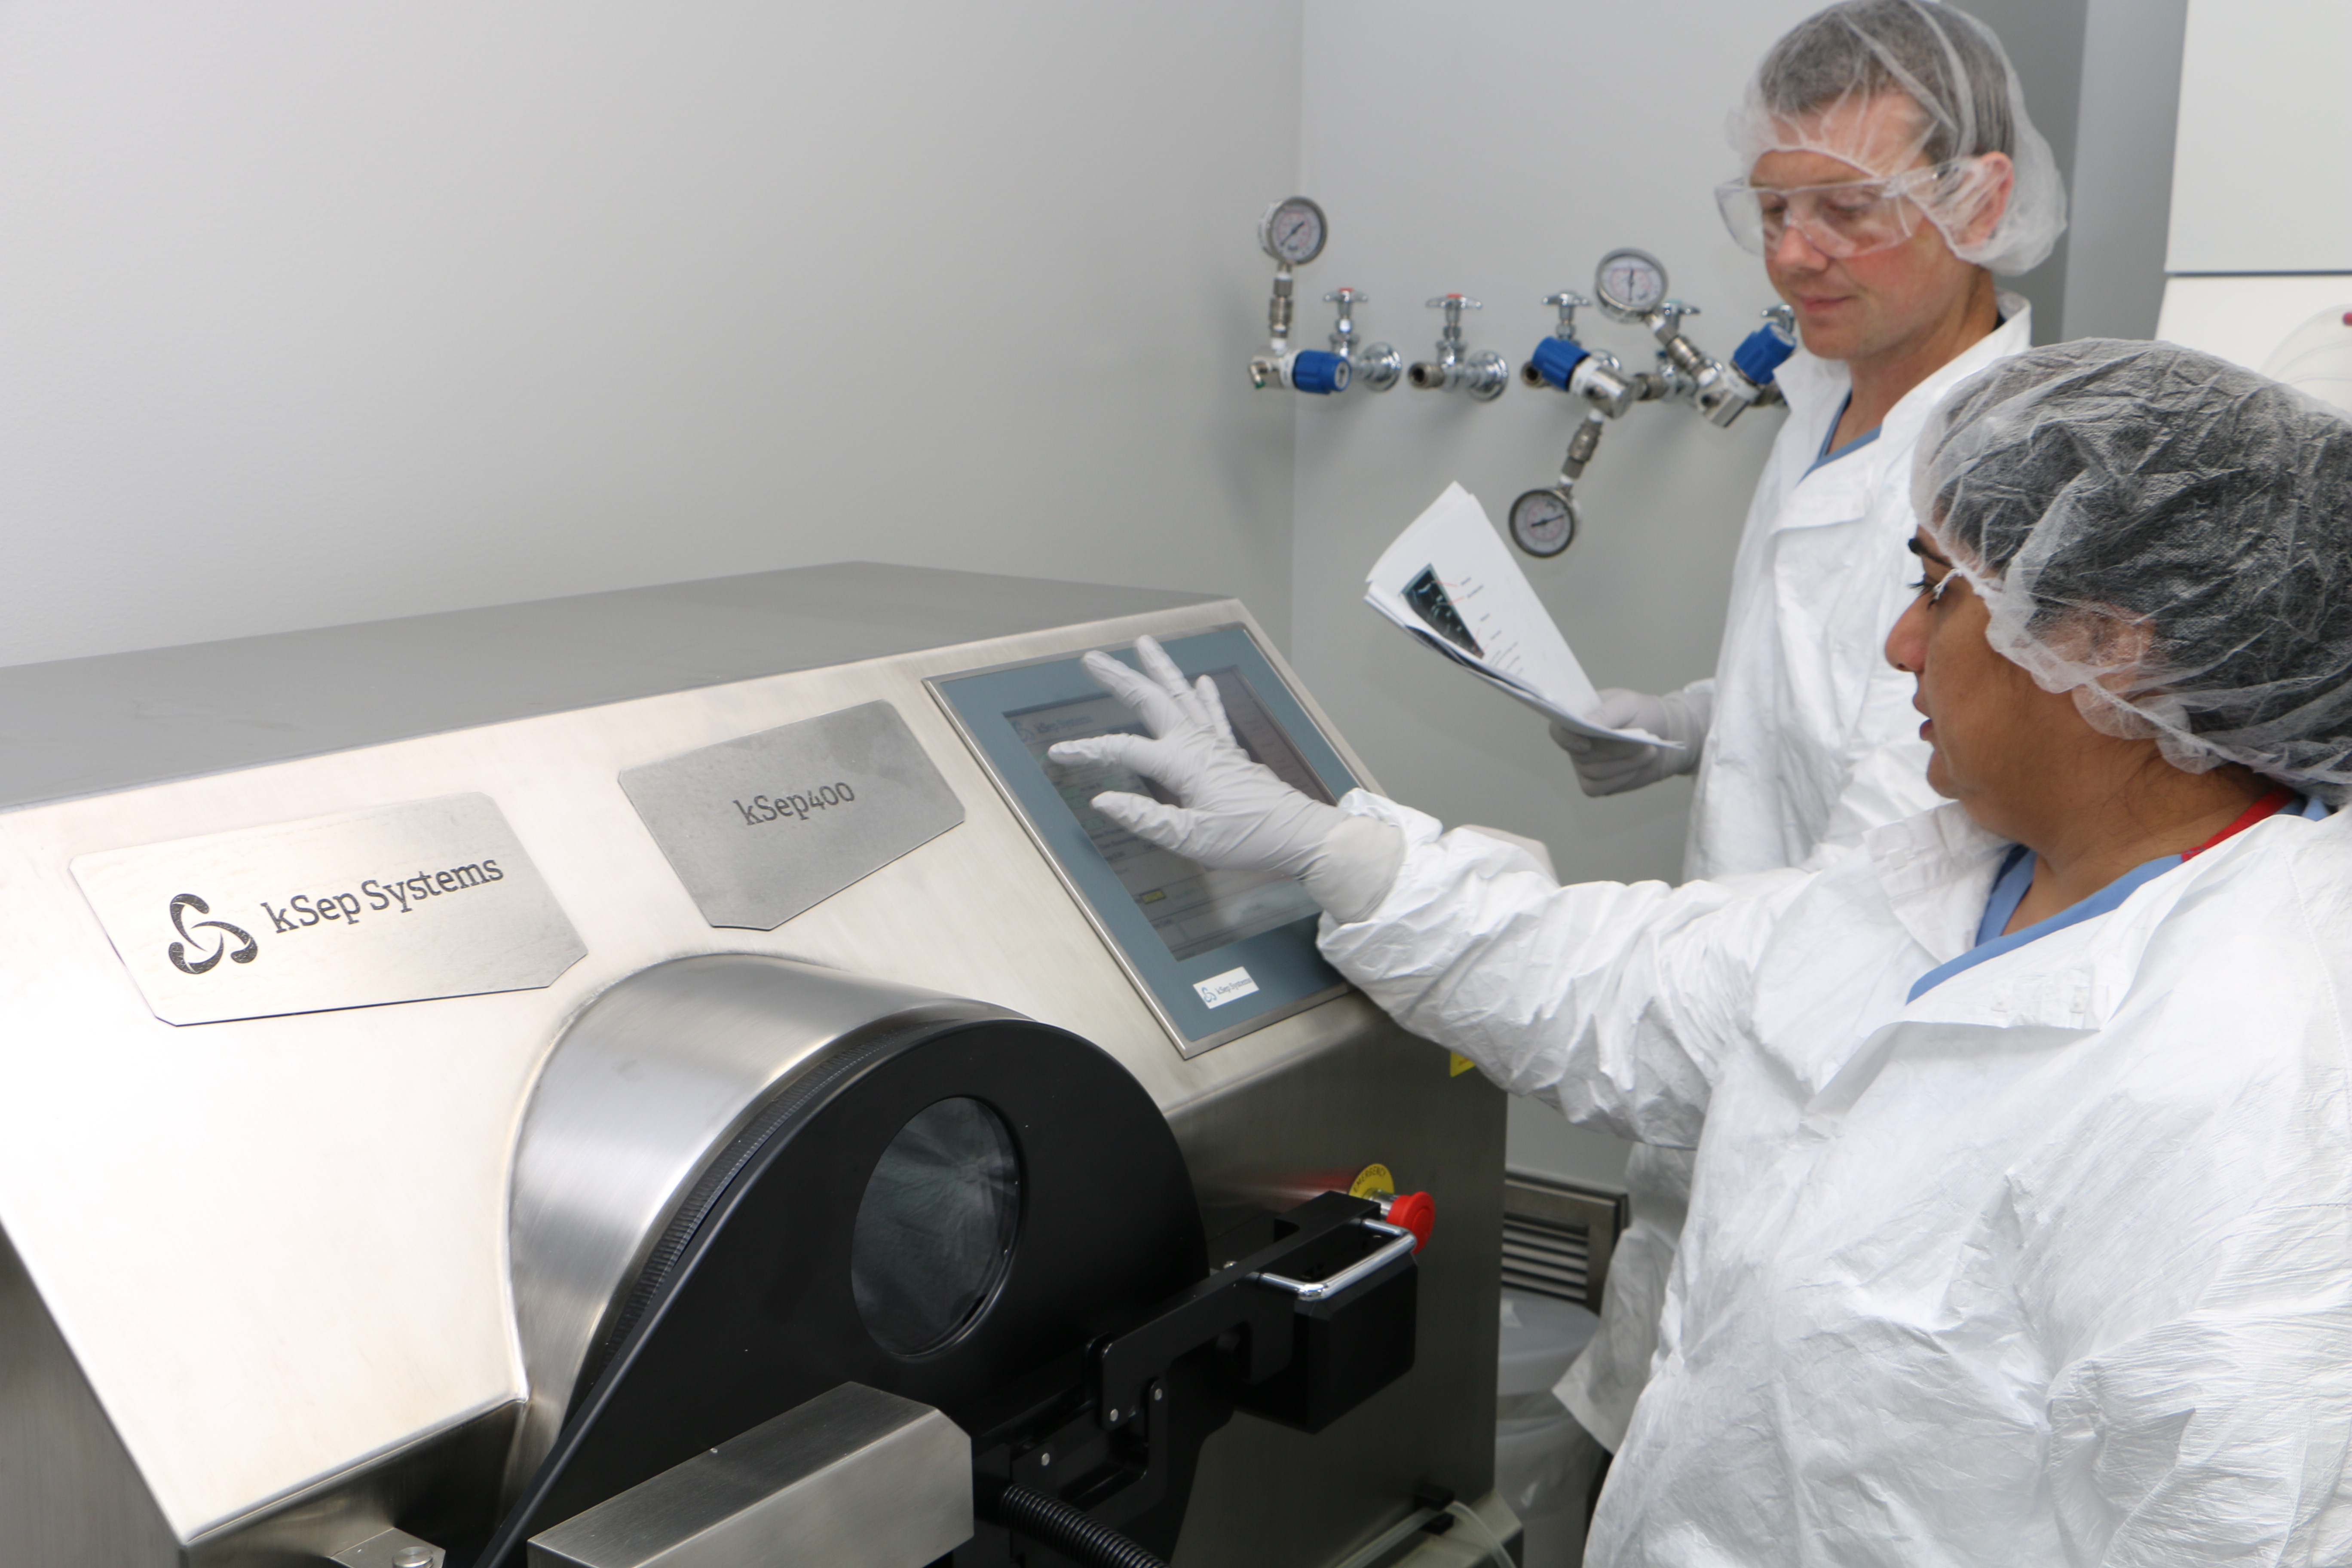 Photo of two staff members in protective lab gear standing next to a large centrifuge.